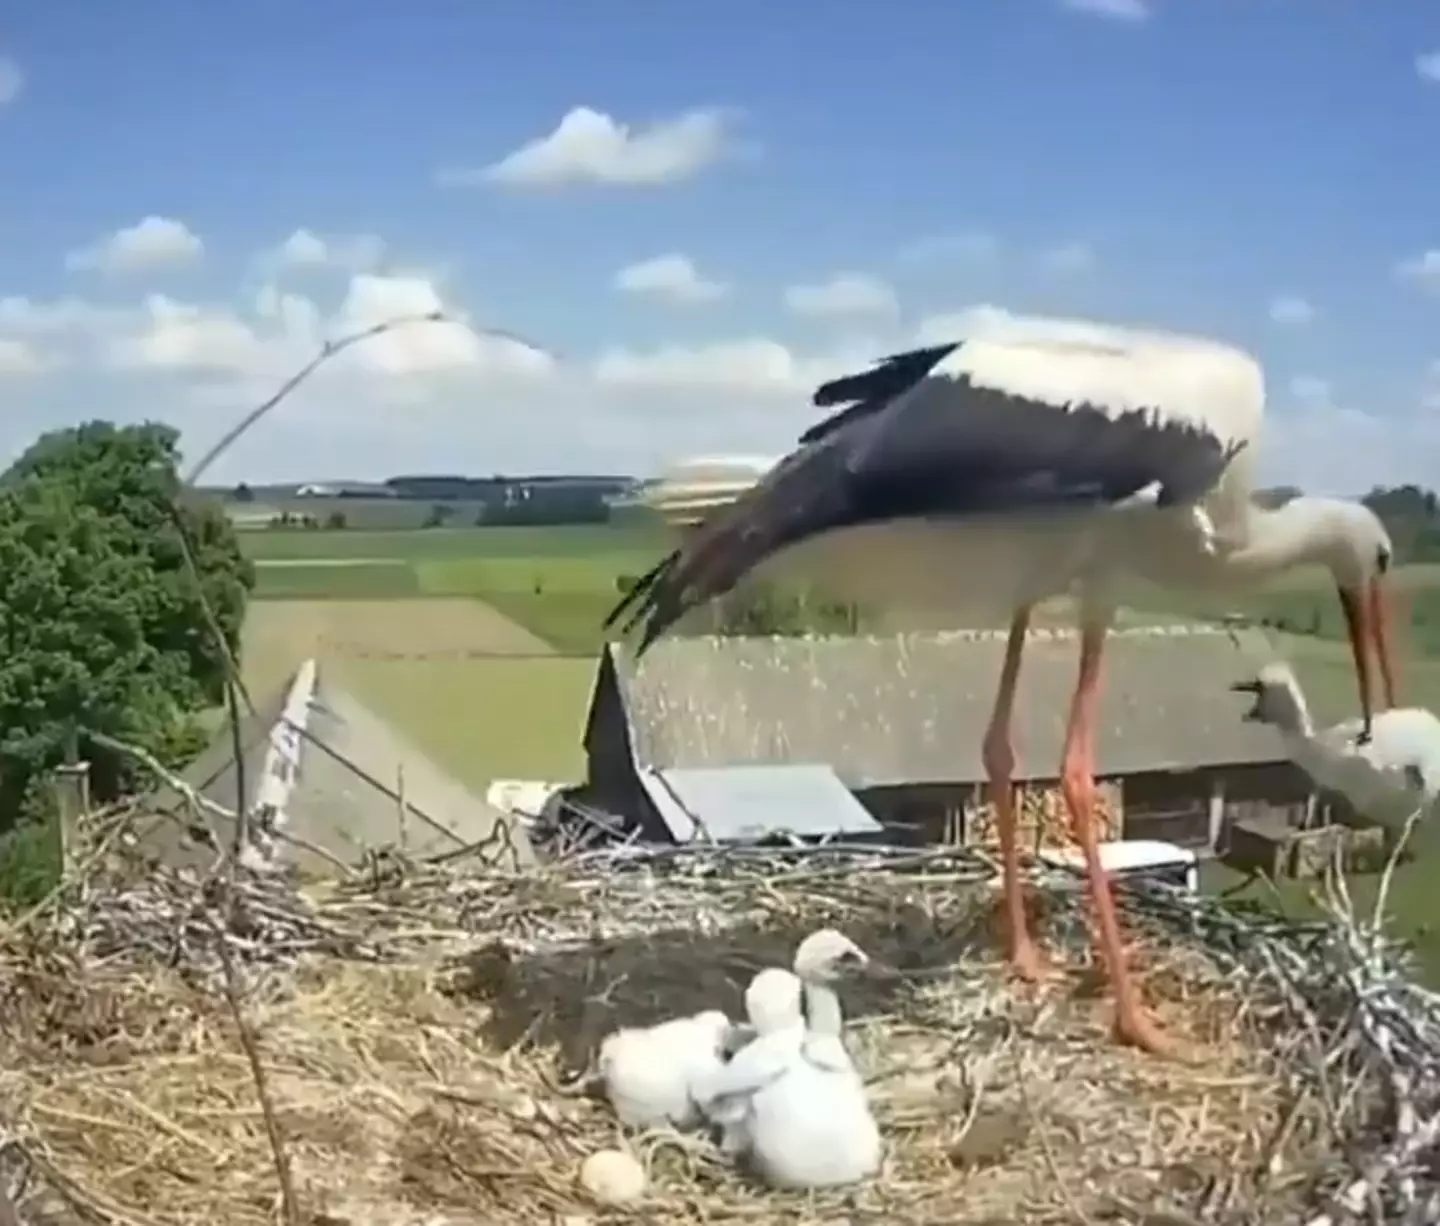 The White Stork didn't hesitate to throw her chick out of the nest.